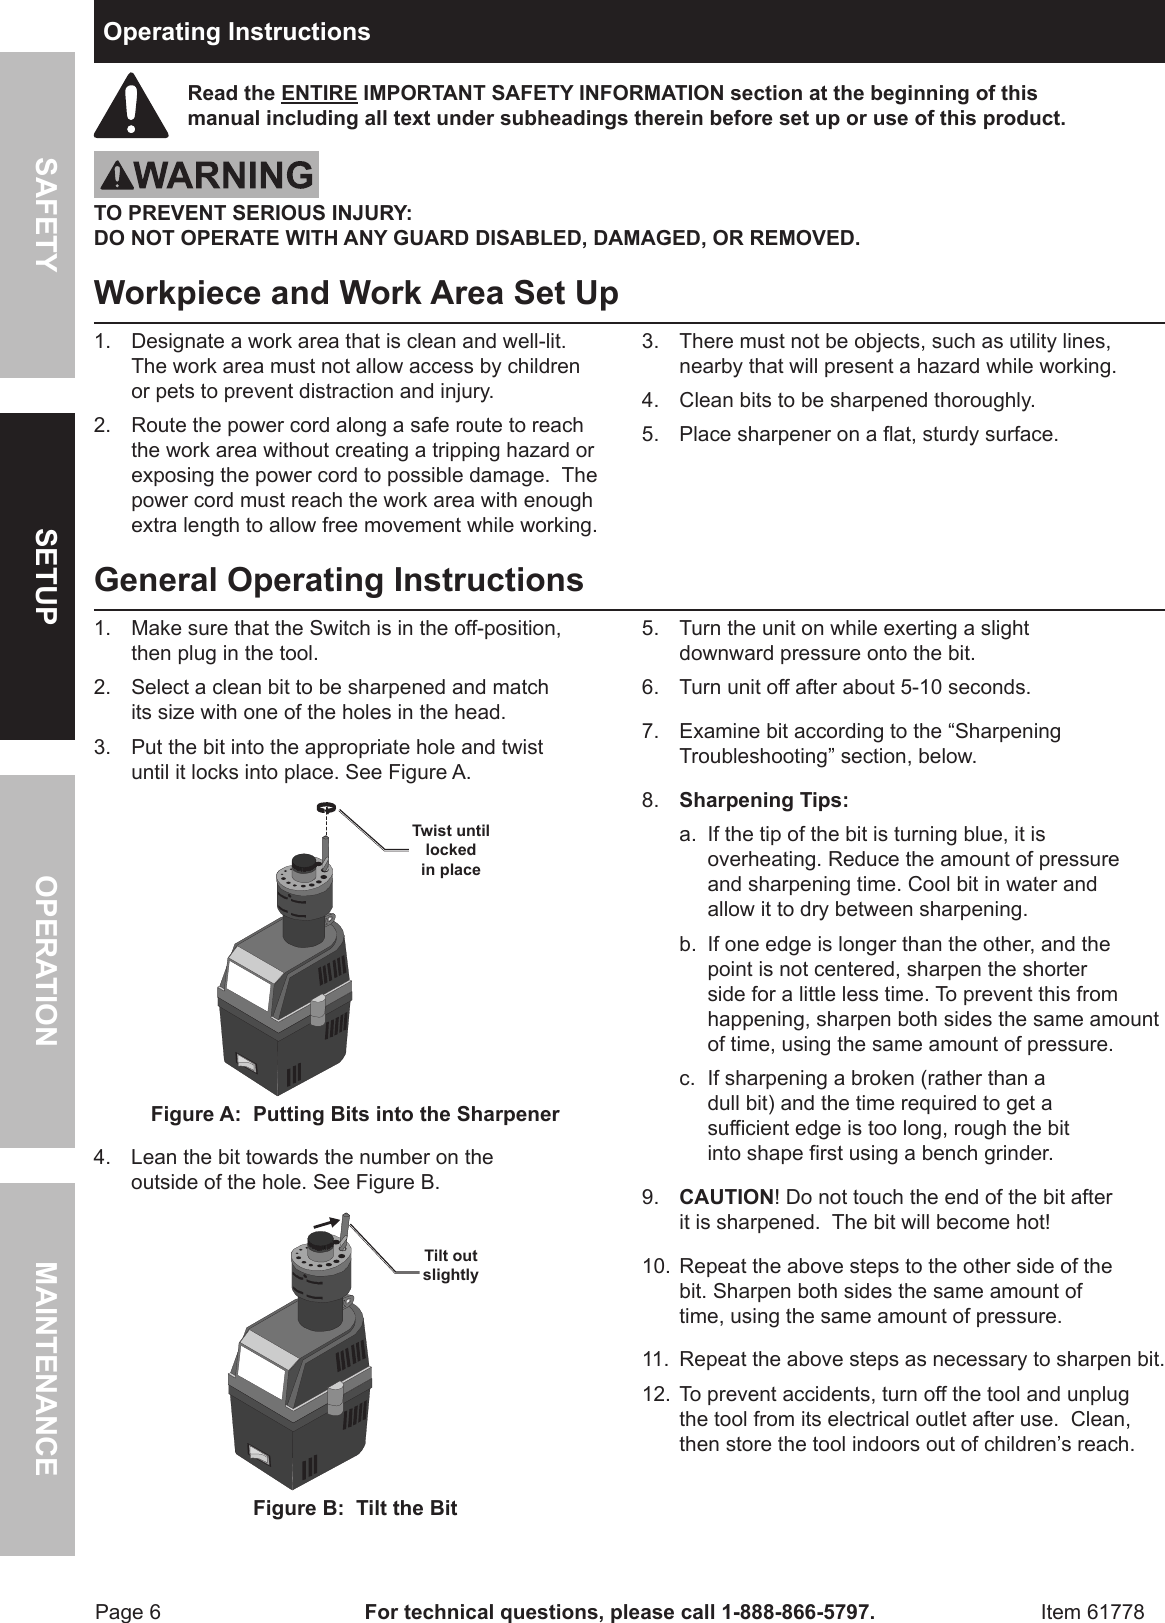 Page 6 of 12 - Harbor-Freight Harbor-Freight-Electric-Drill-Bit-Sharpener-Product-Manual-  Harbor-freight-electric-drill-bit-sharpener-product-manual